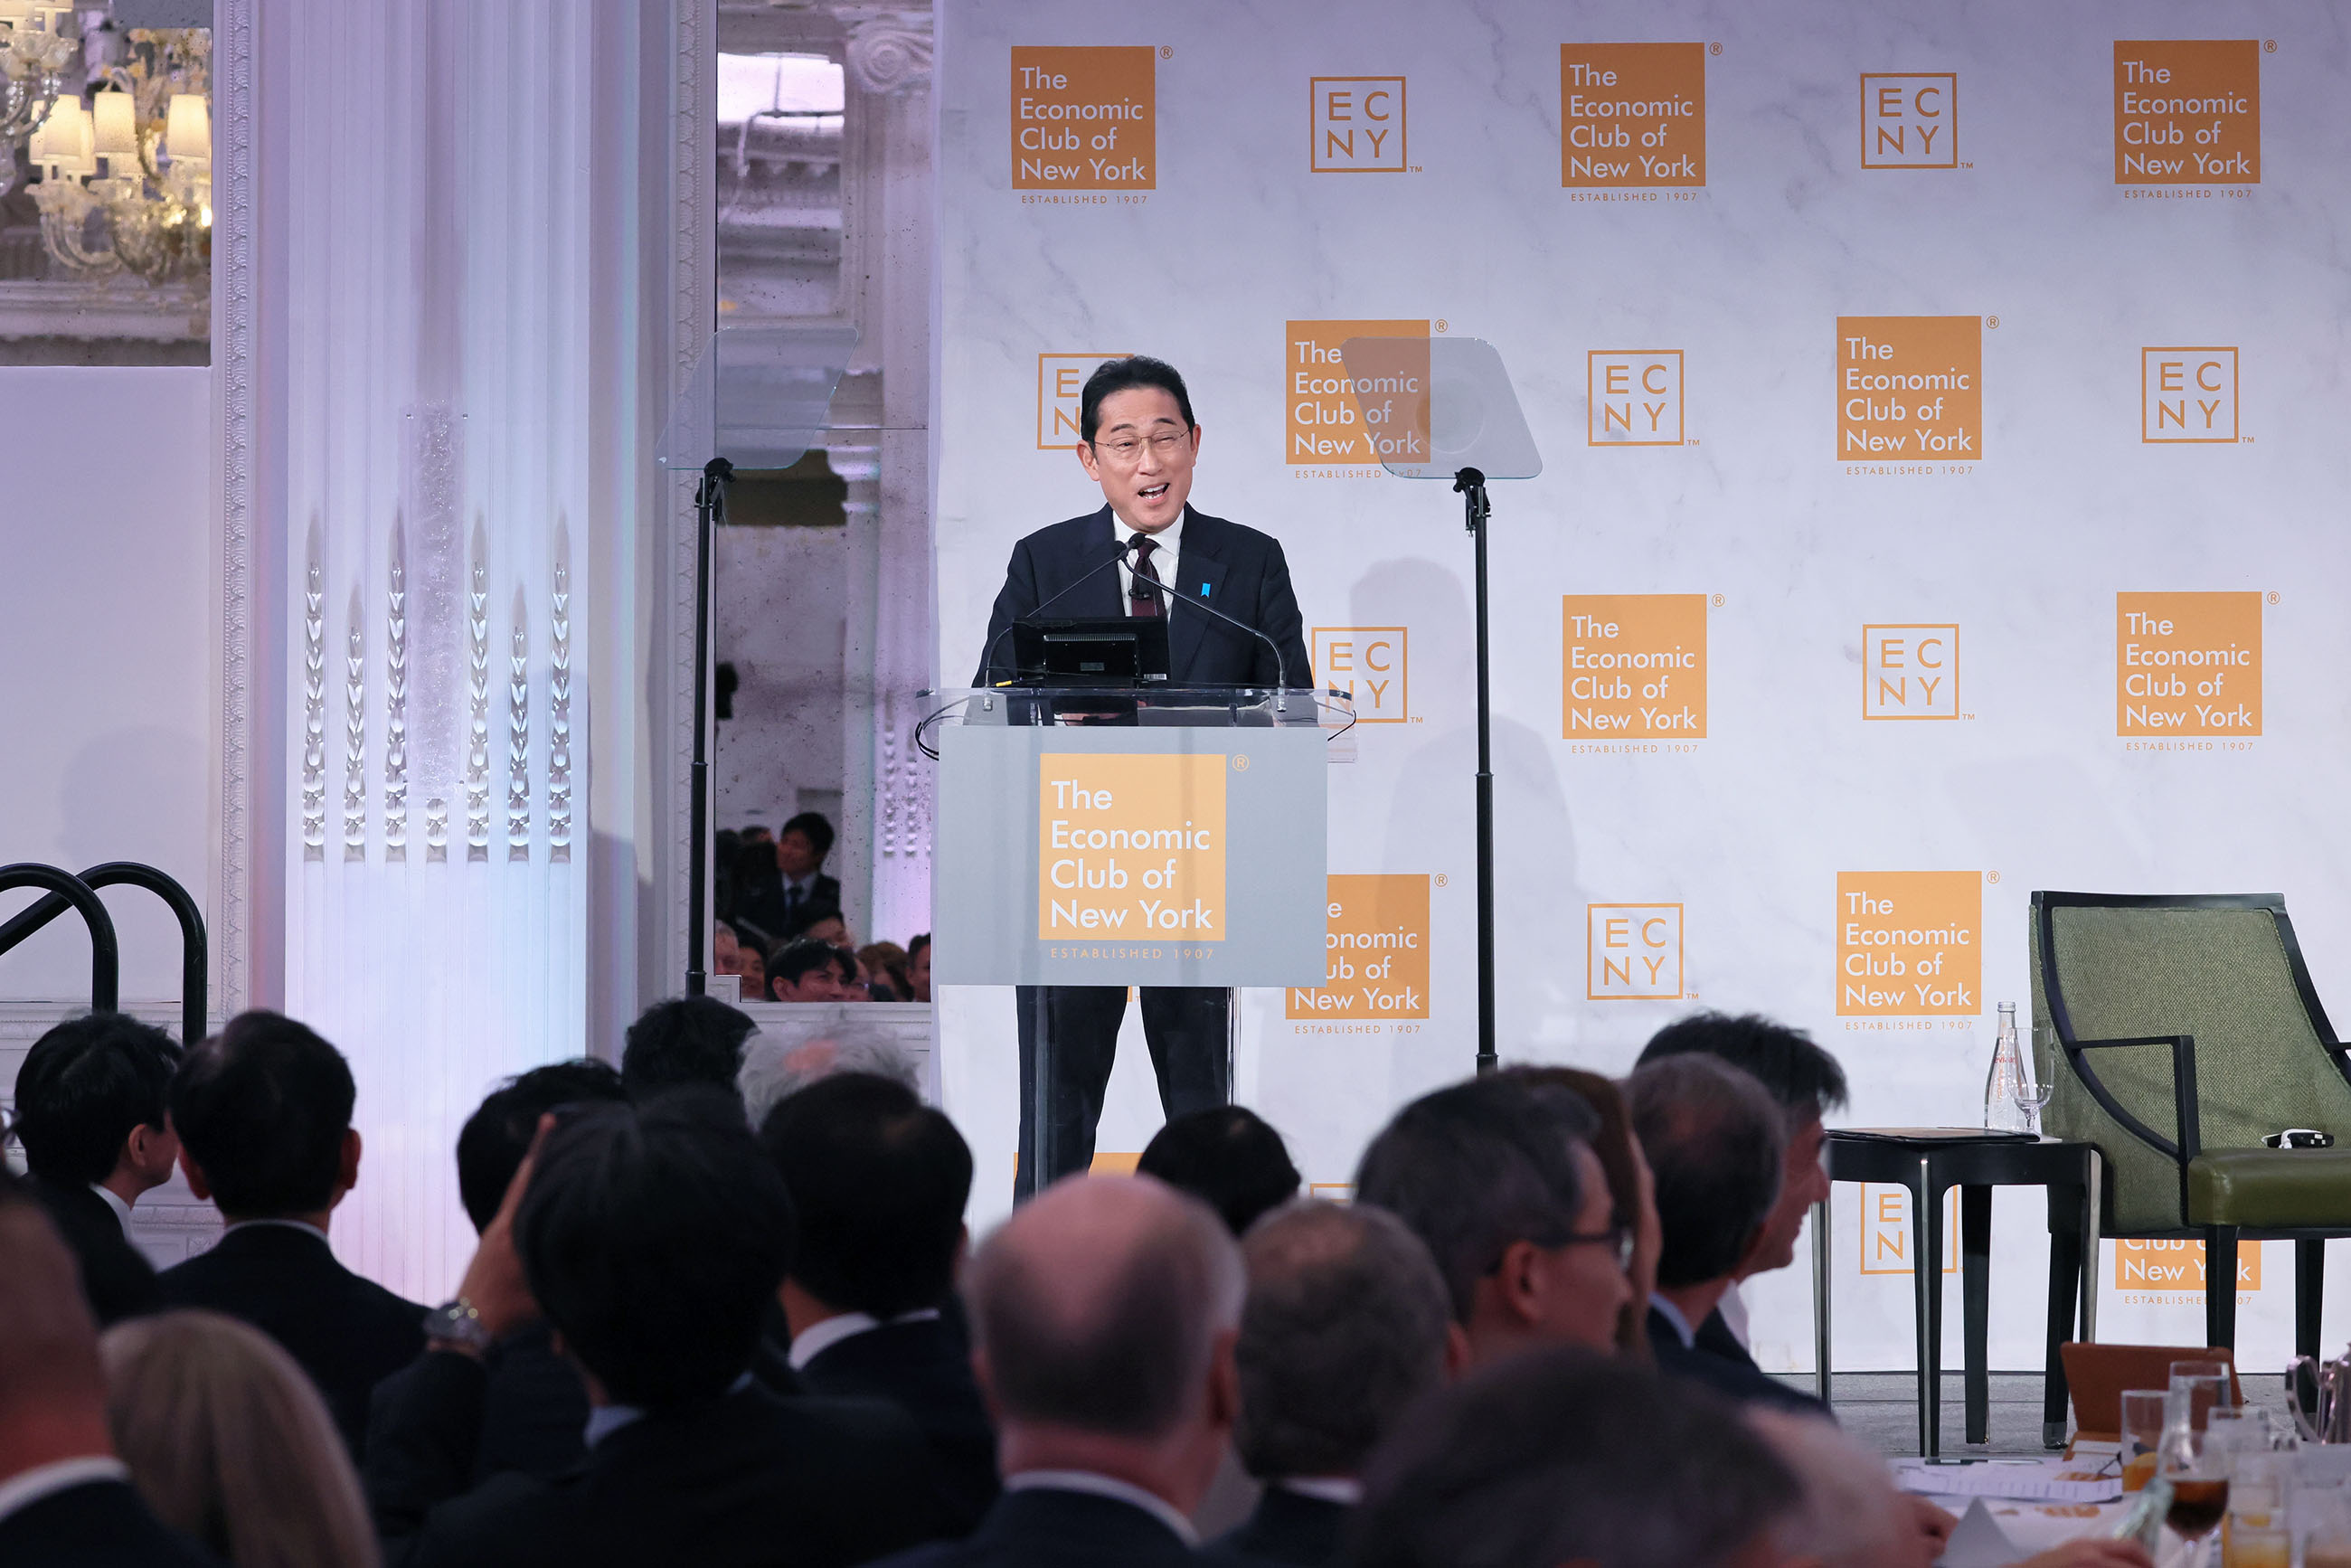 Prime Minister Kishida delivering his remarks to the Economic Club of New York (3)